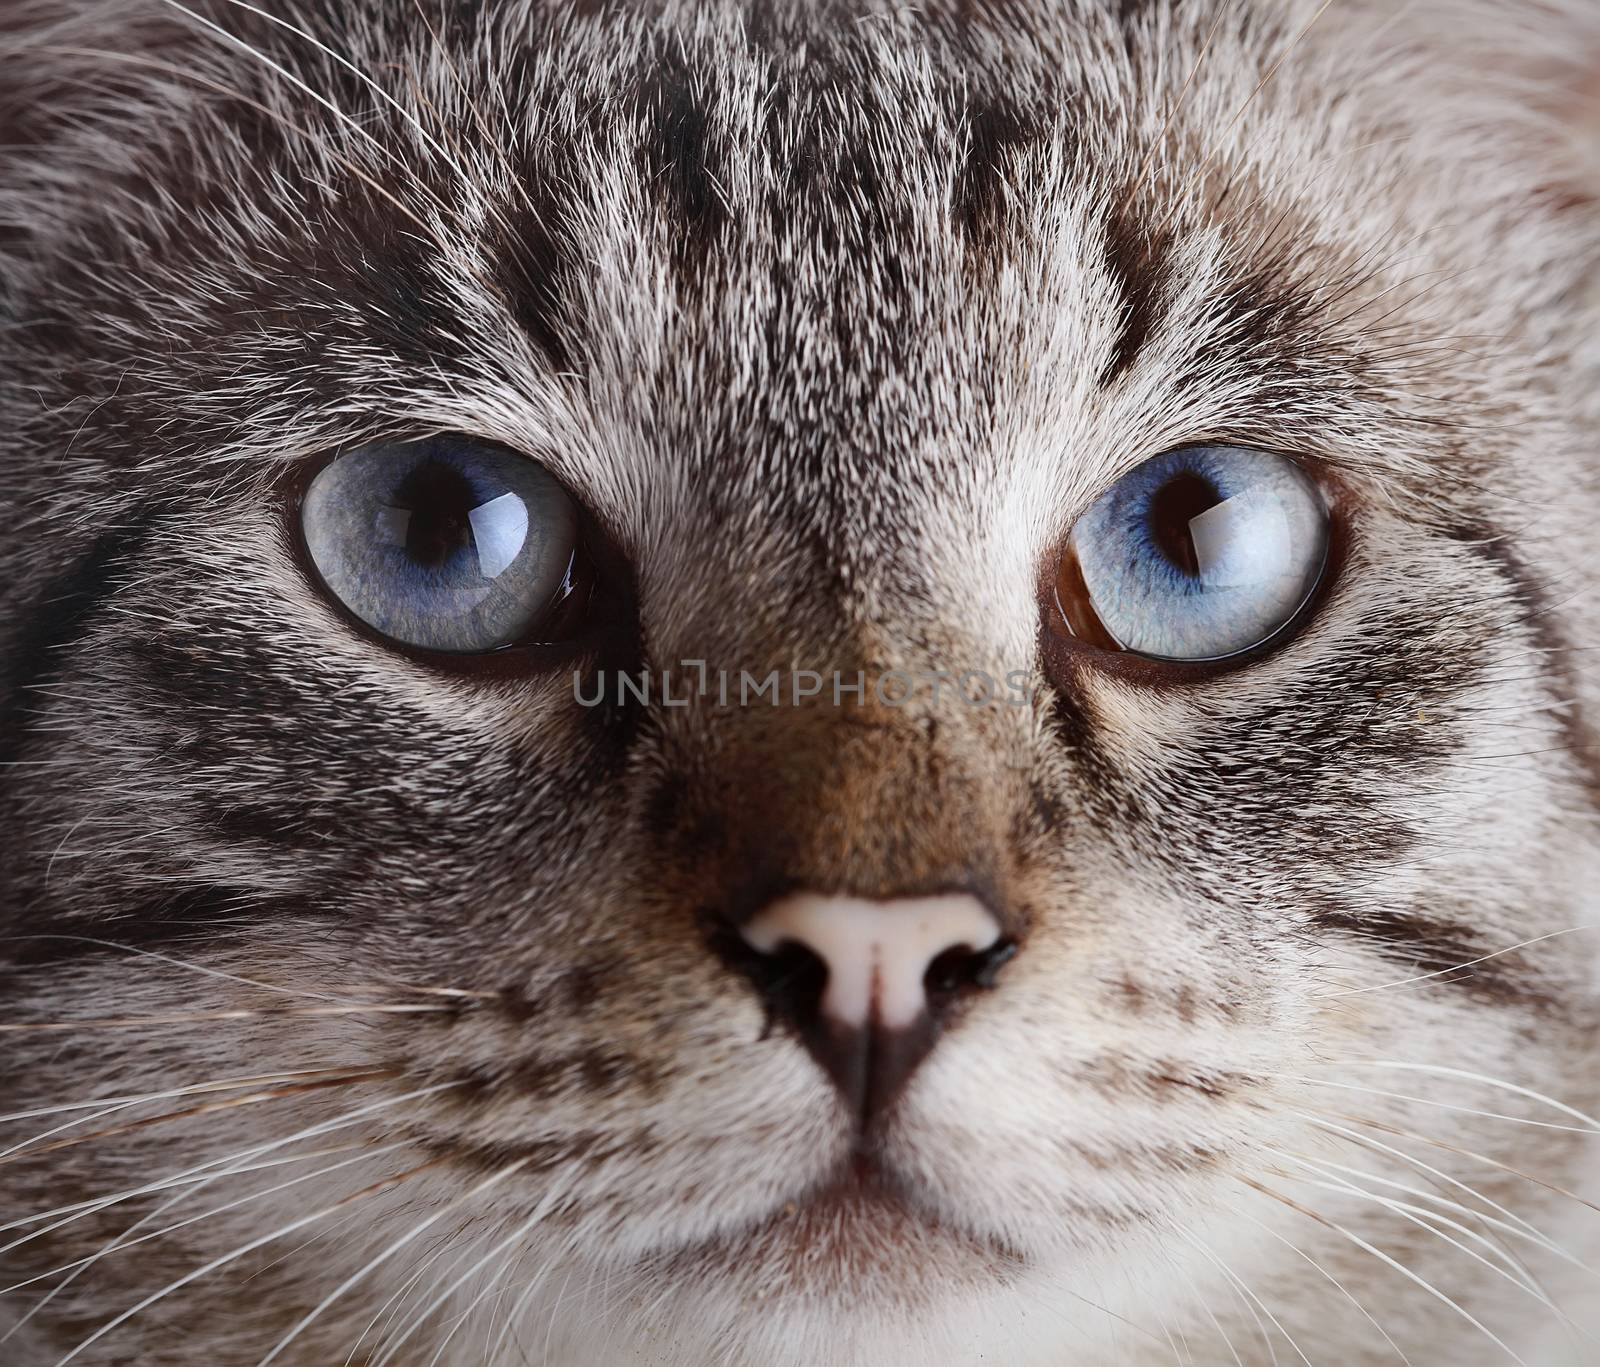 Muzzle of a blue-eyed cat. Portrait of a striped blue-eyed cat. Striped cat. Striped not purebred kitten. Small predator. Small cat.